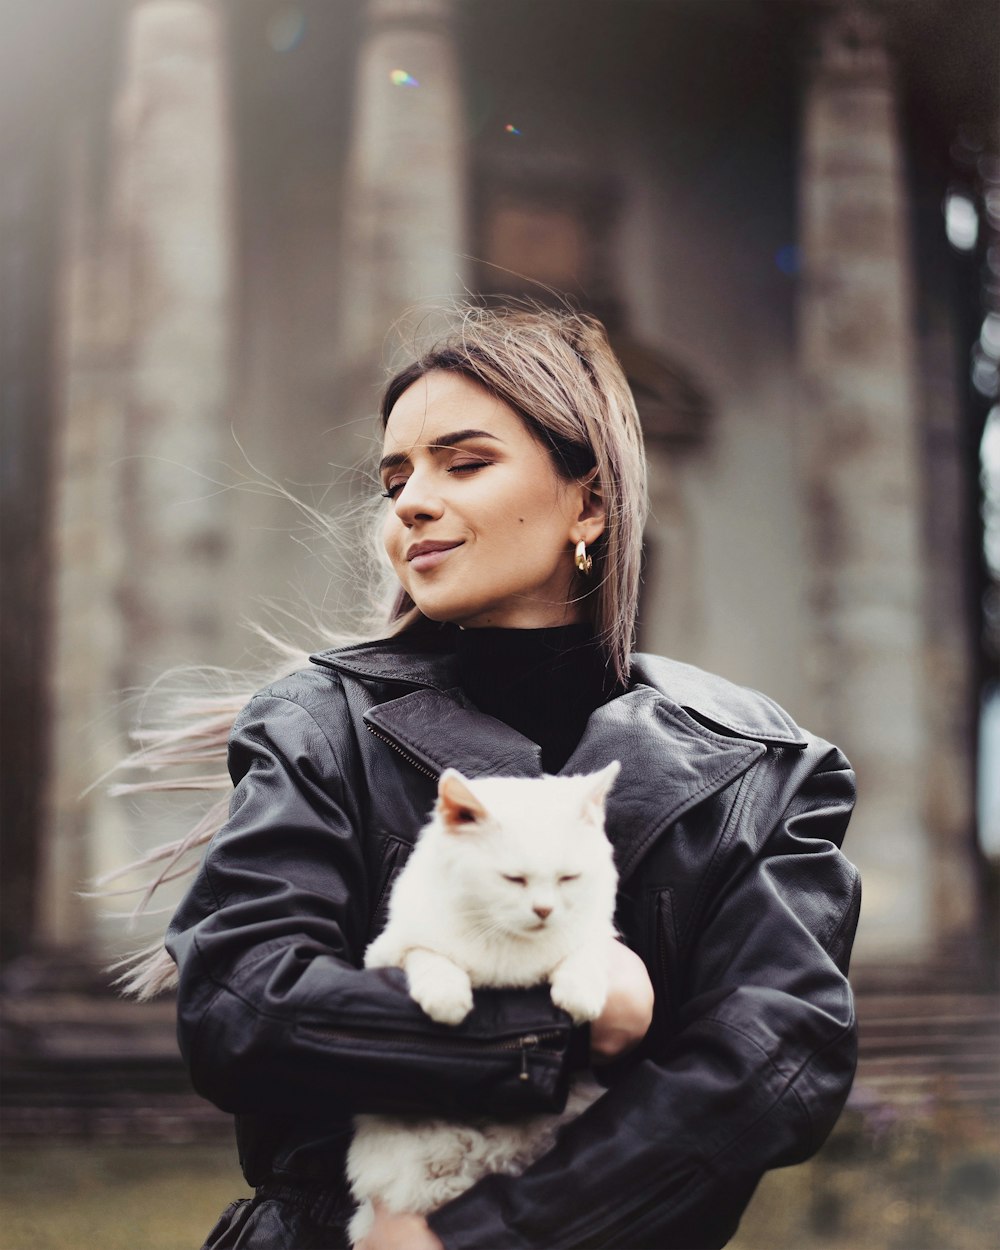 girl in black leather jacket holding white cat